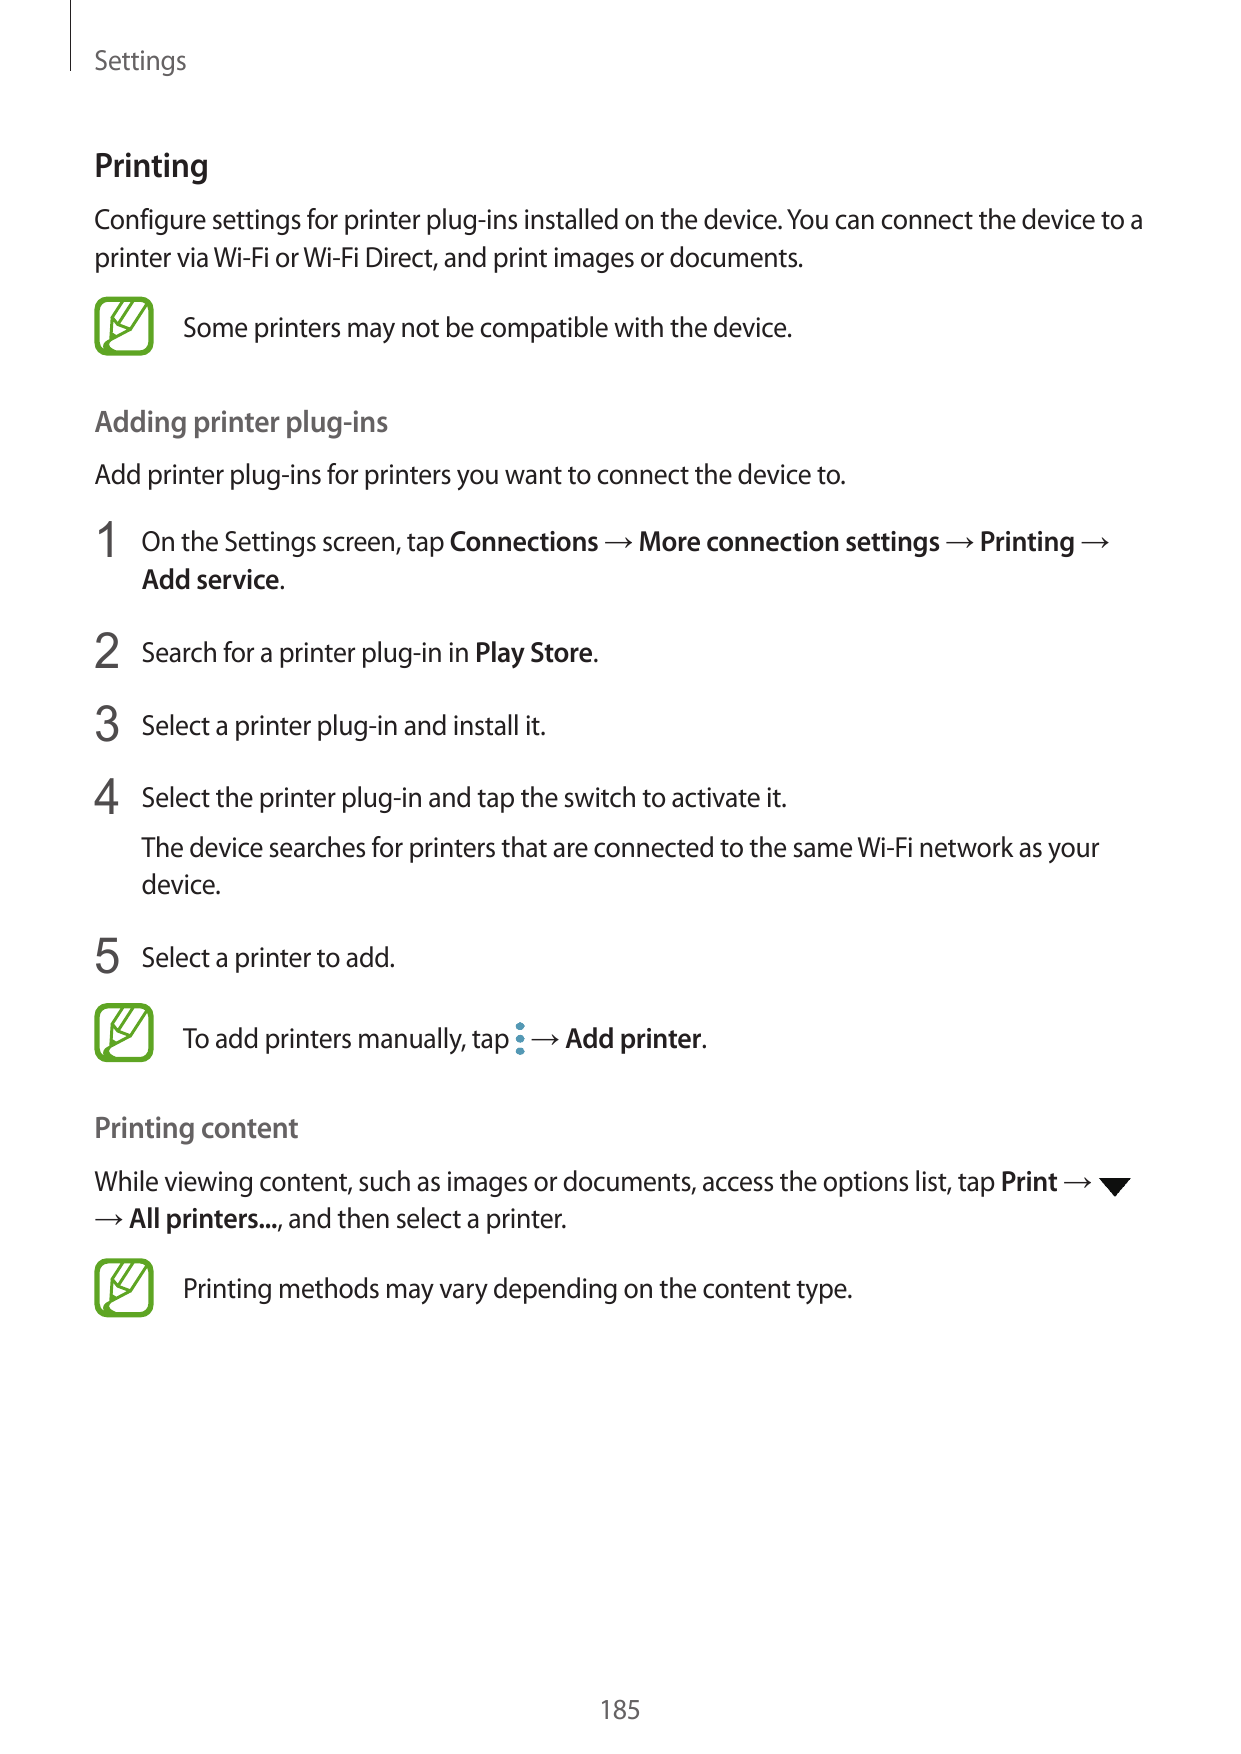 SettingsPrintingConfigure settings for printer plug-ins installed on the device. You can connect the device to aprinter via Wi-F